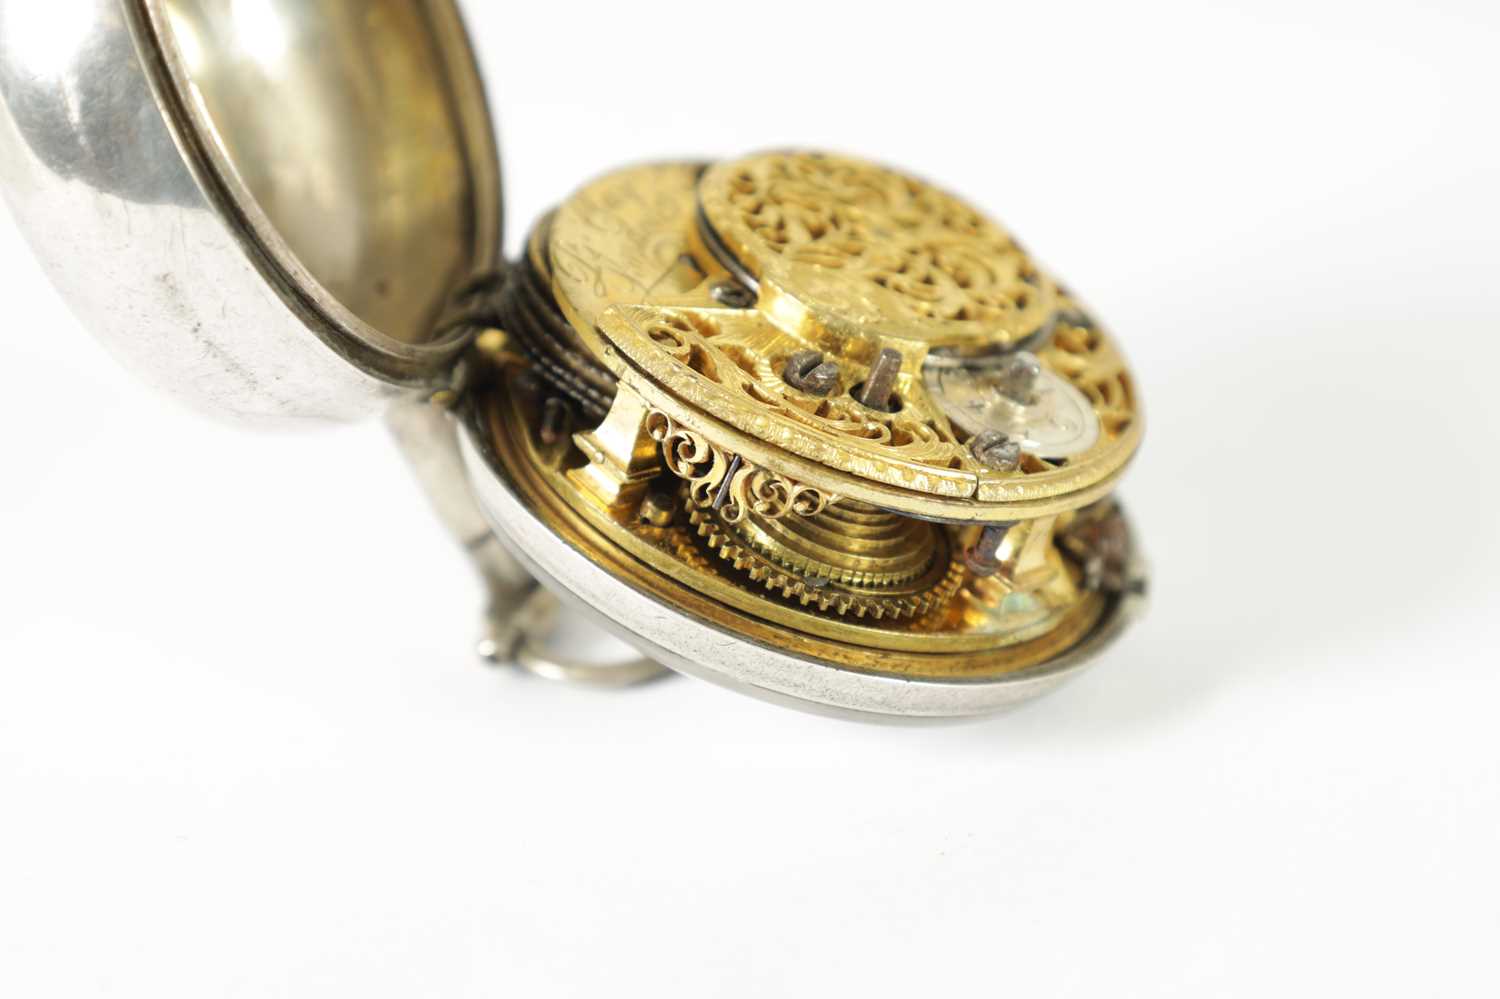 B. CLAY, LONDON. AN EARLY 18TH CENTURY SILVER PAIR CASE VERGE POCKET WATCH - Image 8 of 10